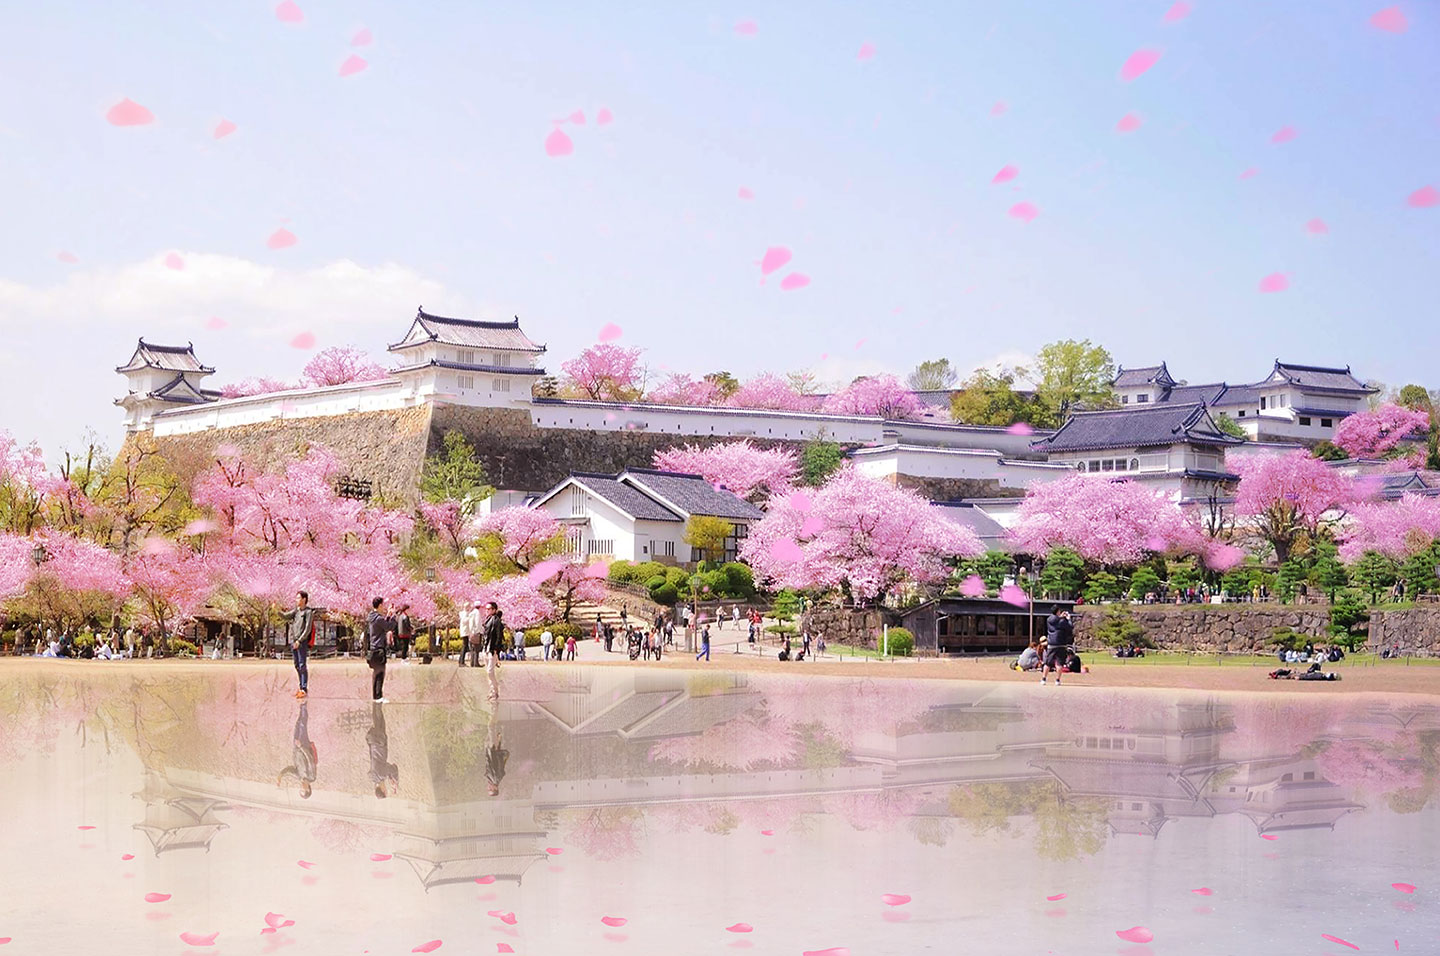 Walls of the fortress of the White Heron Castle in Himeji, Kyoto, under cherry blossoms, water mirror and hanami